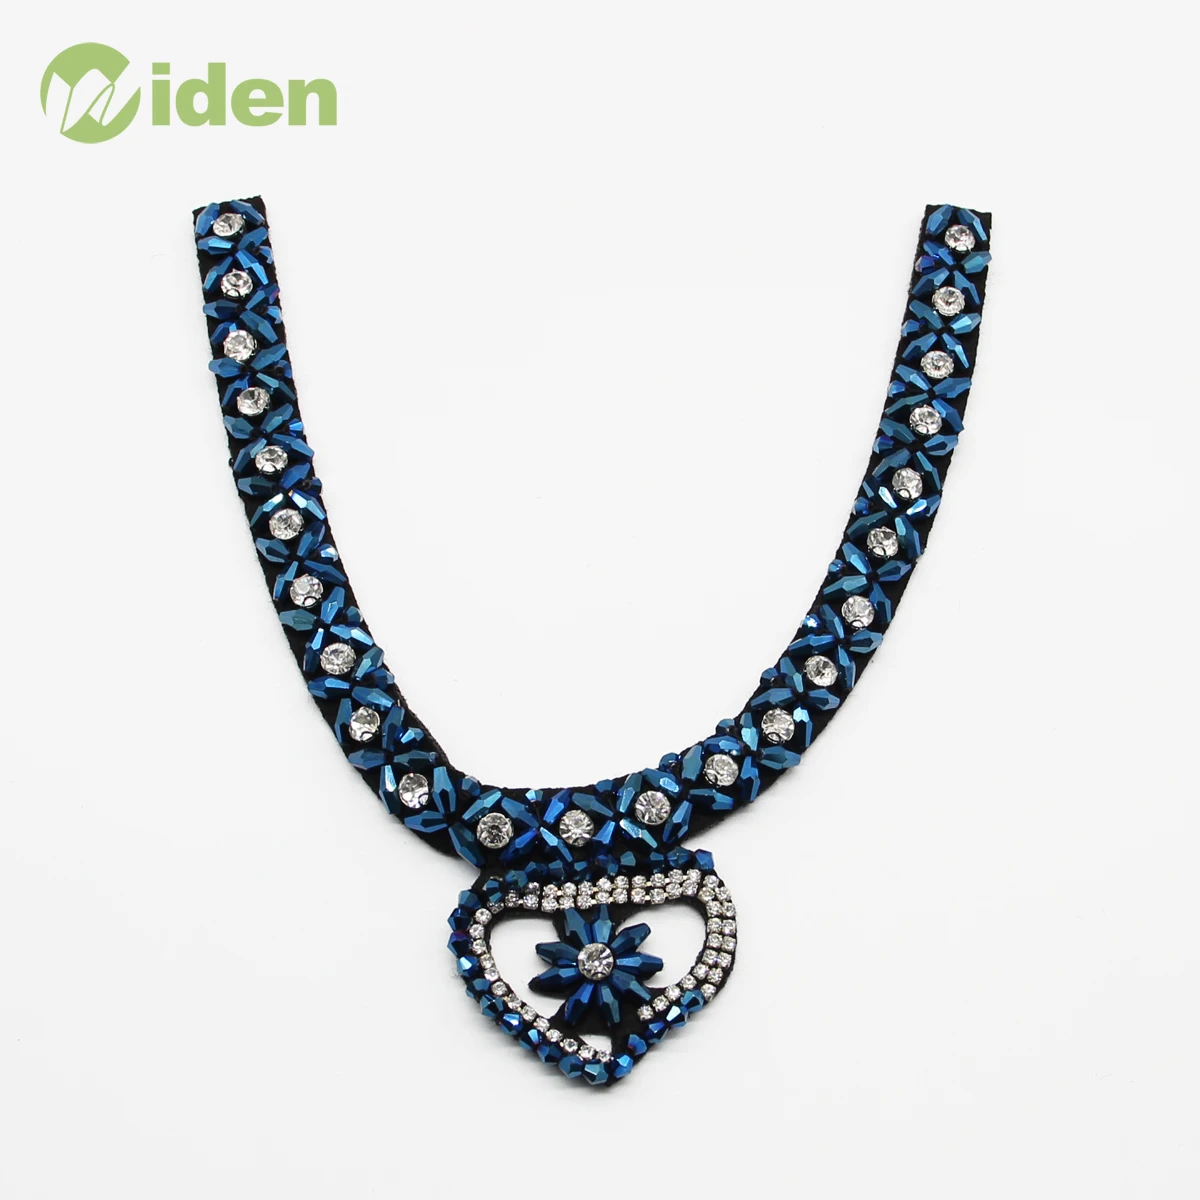 Heart Design Rhinestone Embroidered Beads Collar Neckline Lace Trimming